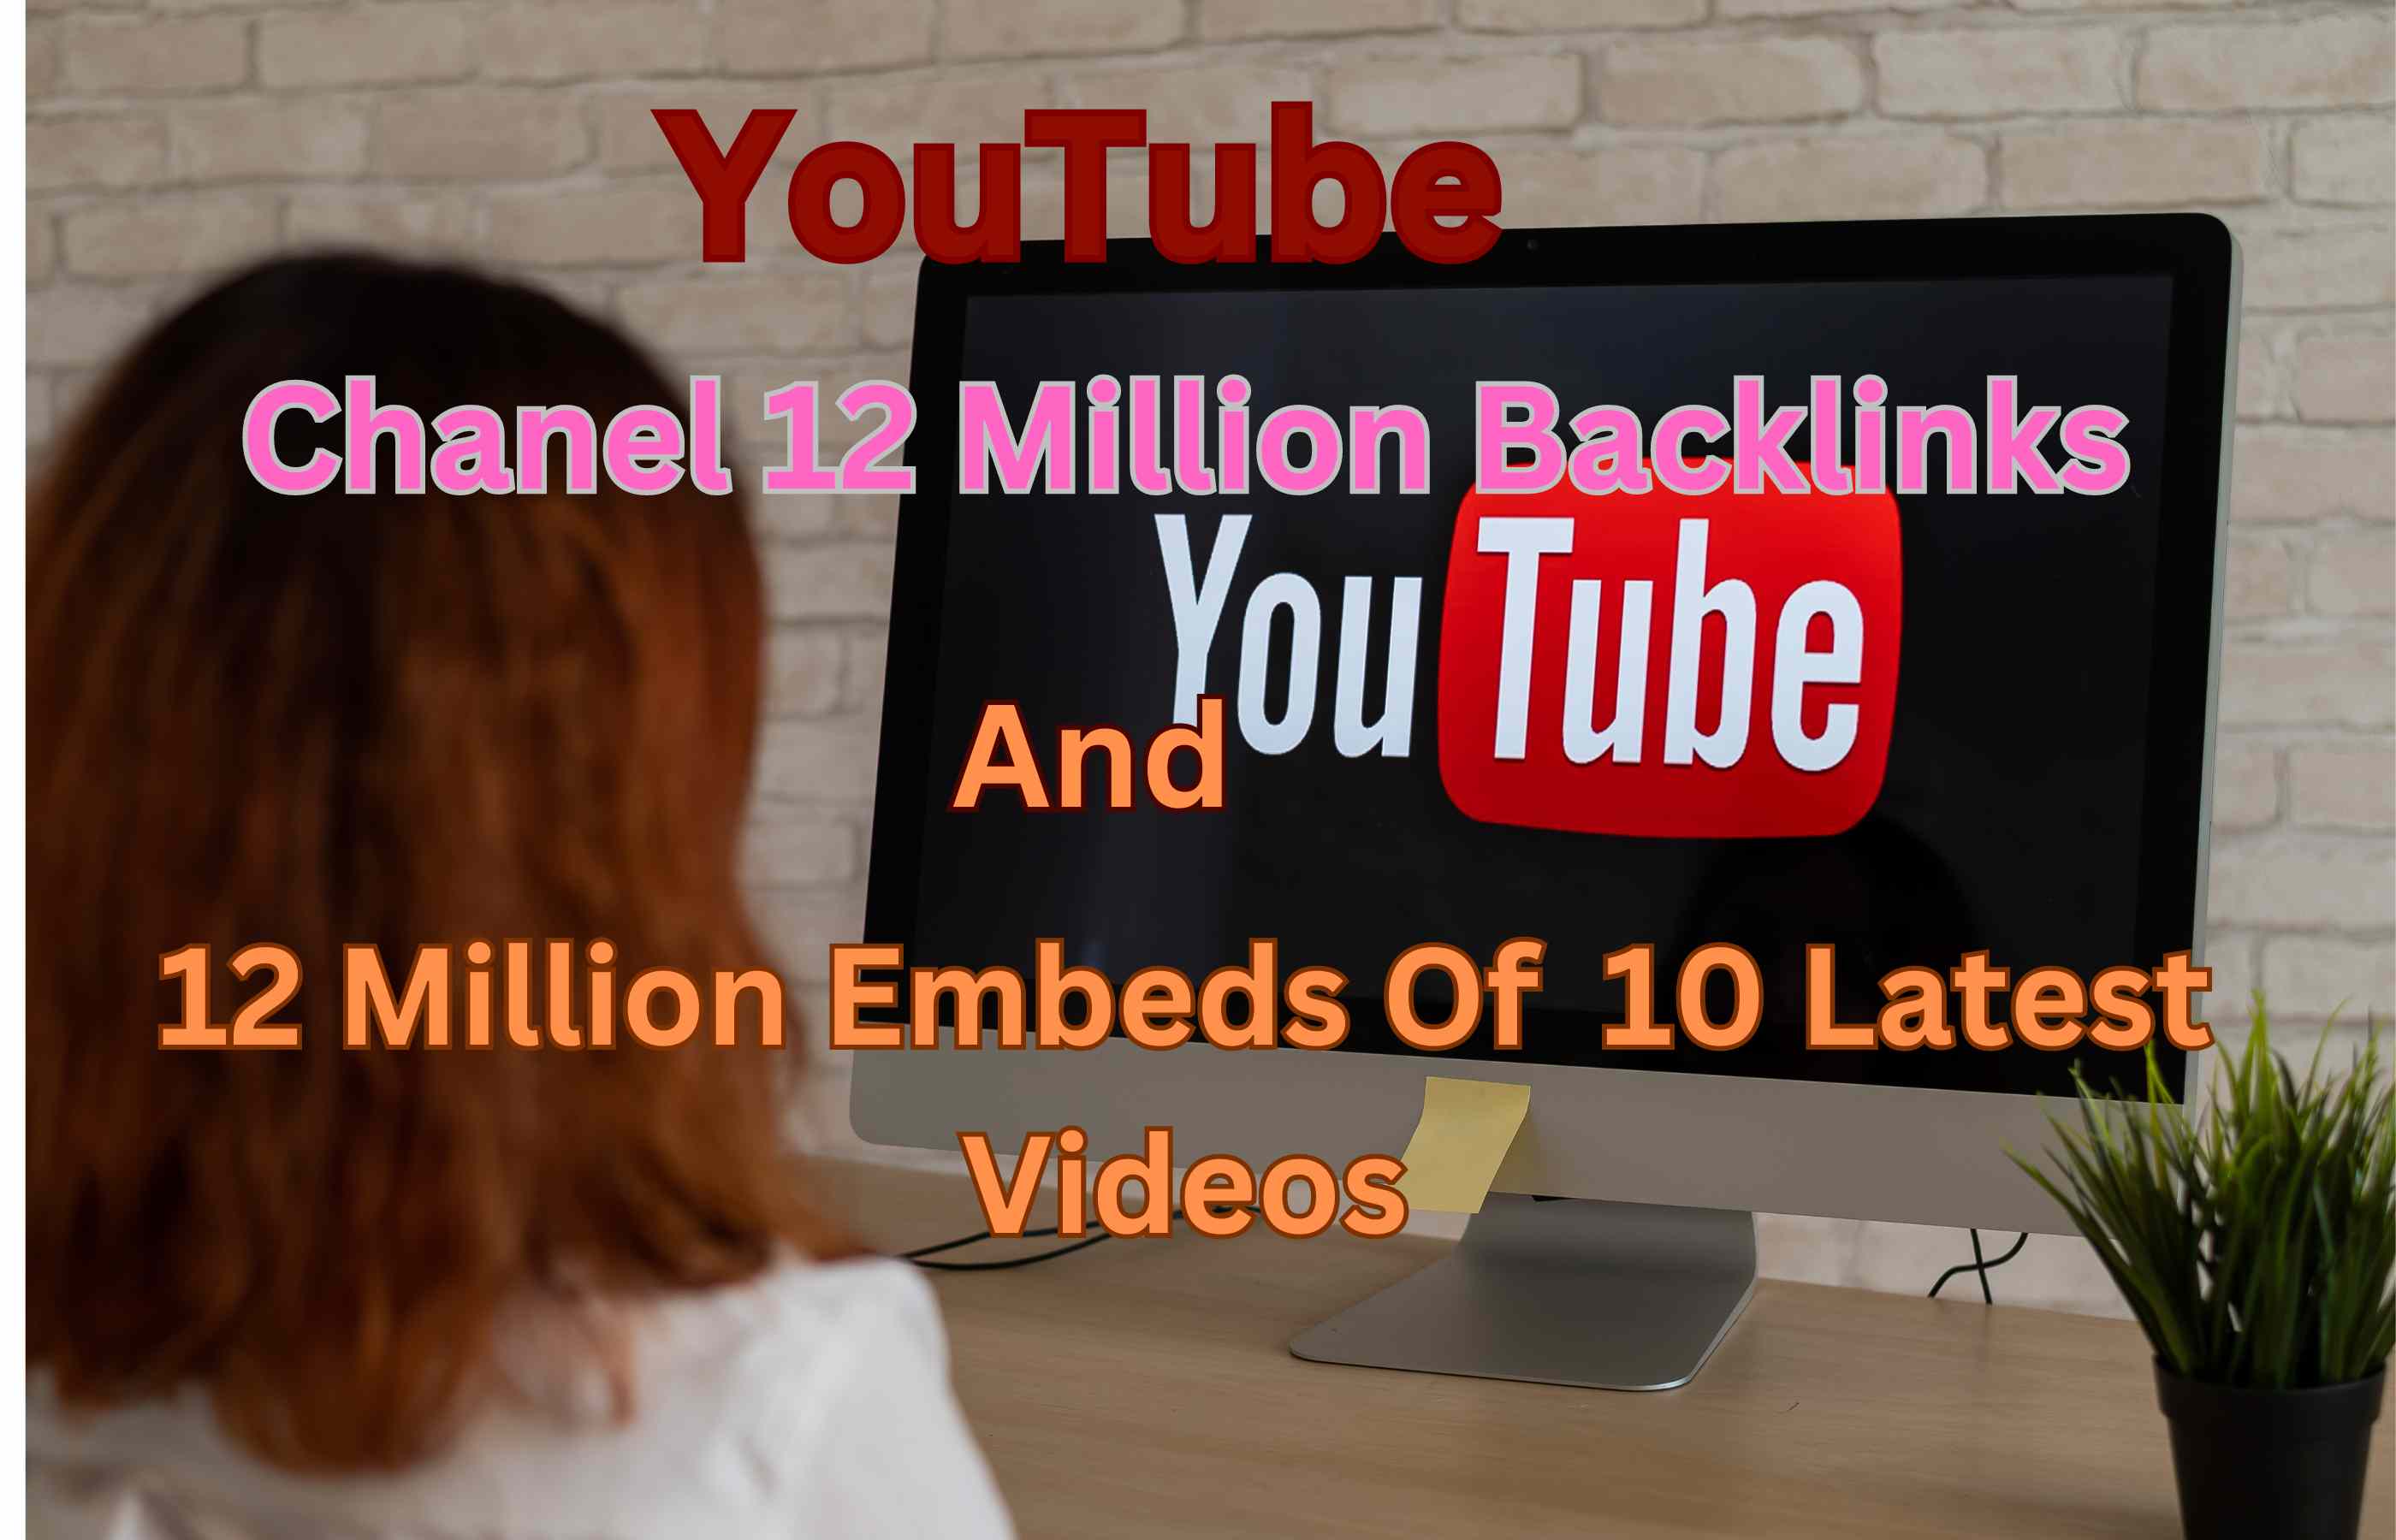 YouTube Channel 12 Million Backlinks and 12 Million Embeds for the 10 Latest Videos.